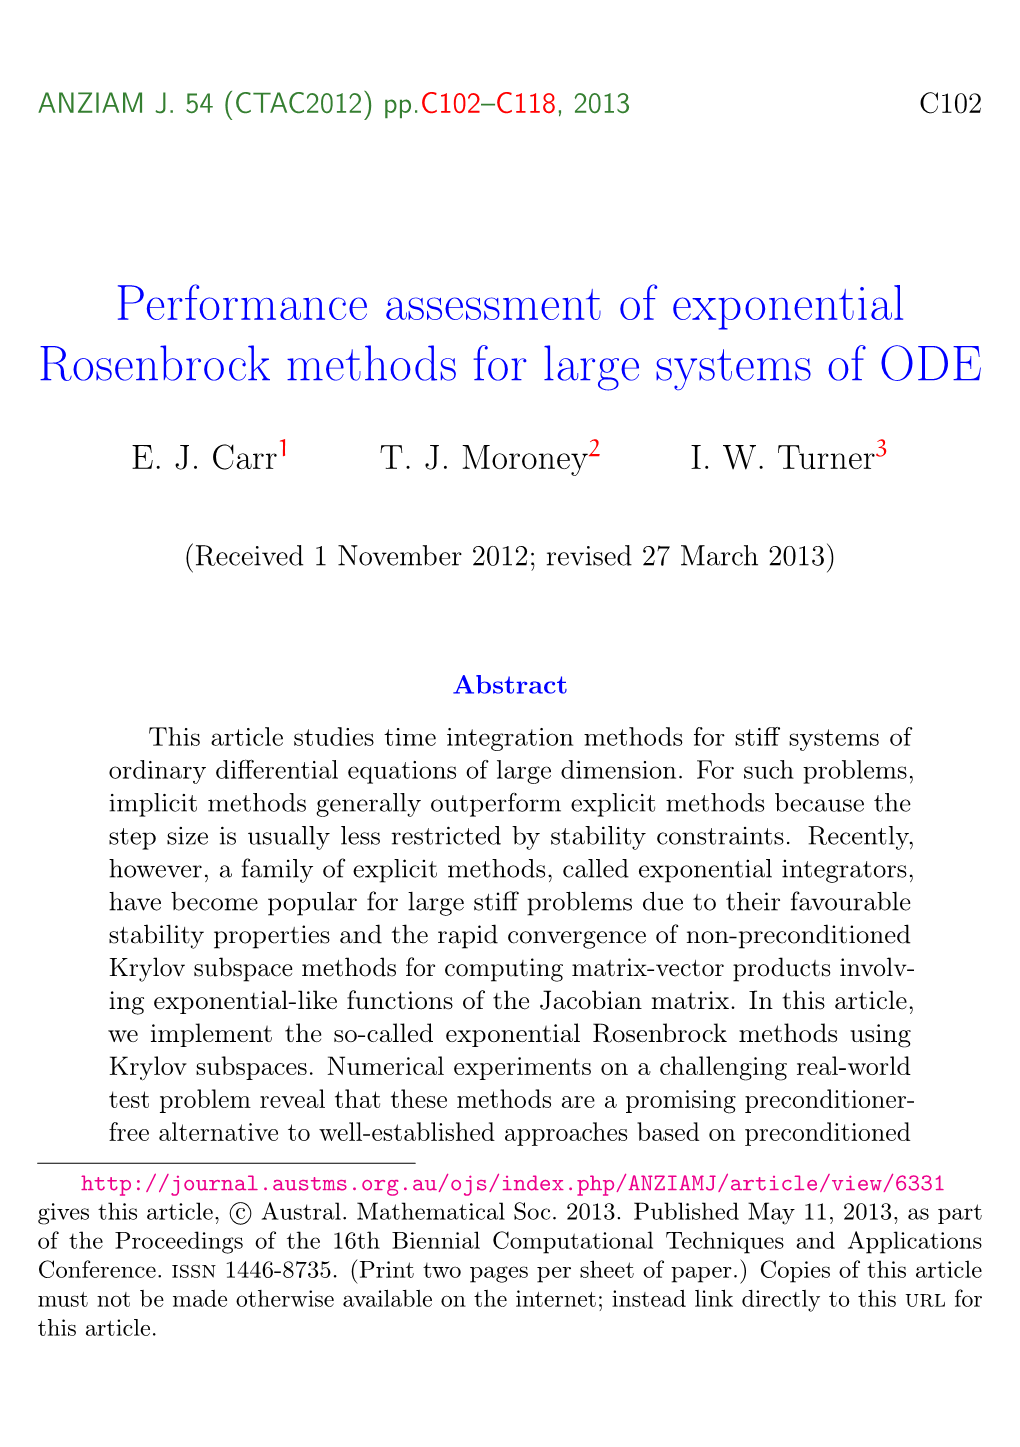 Performance Assessment of Exponential Rosenbrock Methods for Large Systems of ODE